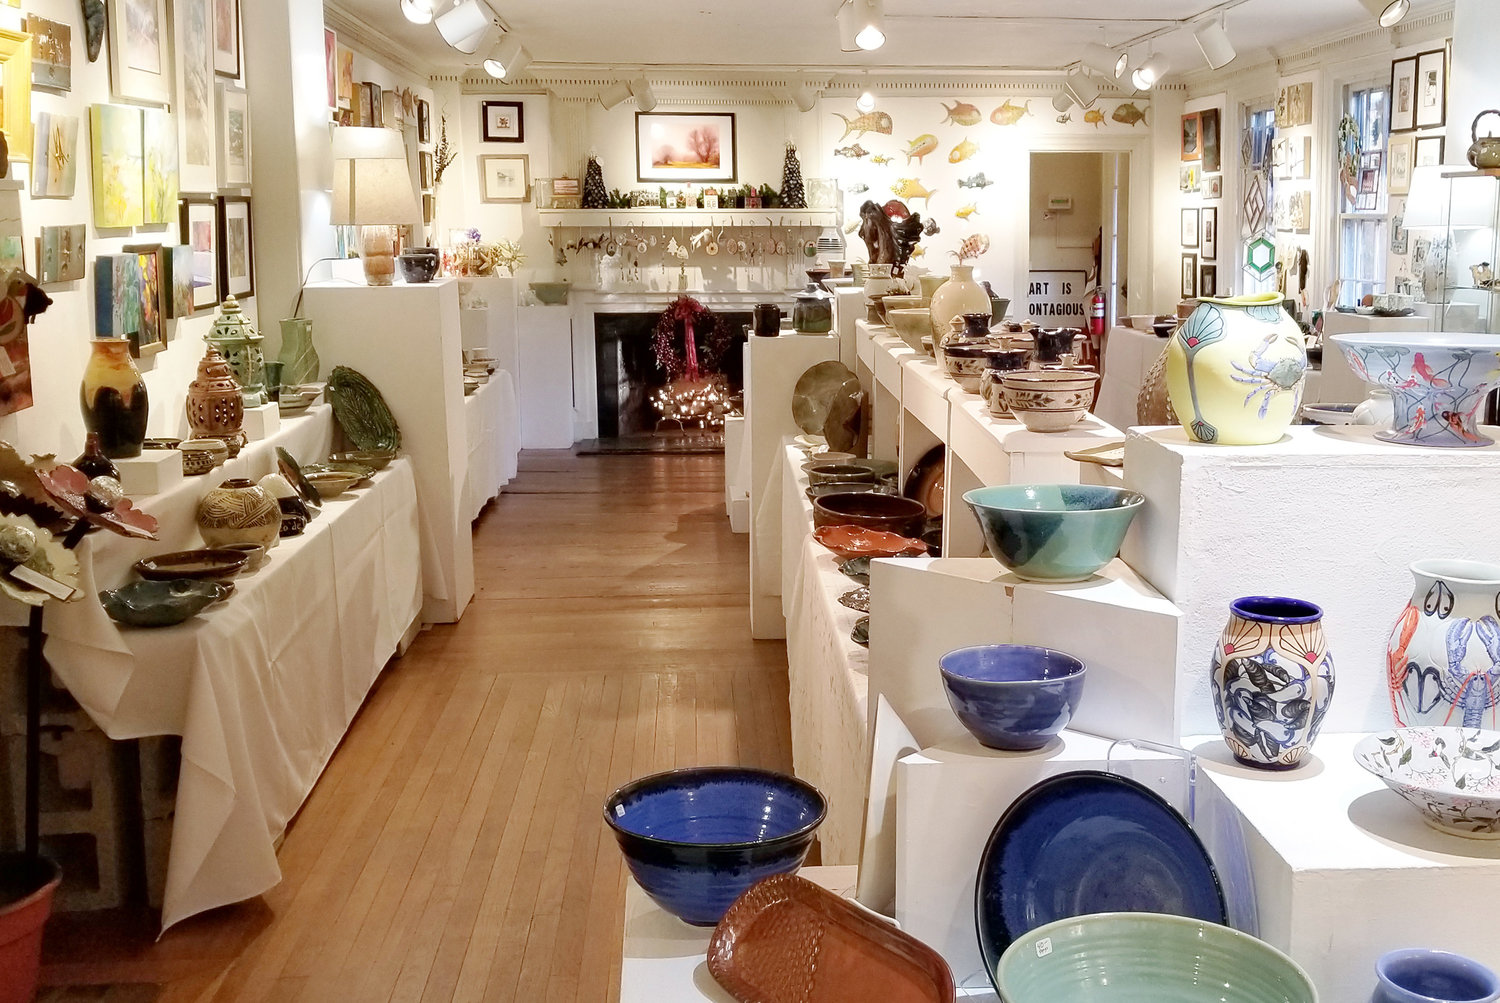 South County Art Association's Holiday Pottery and Art Sale